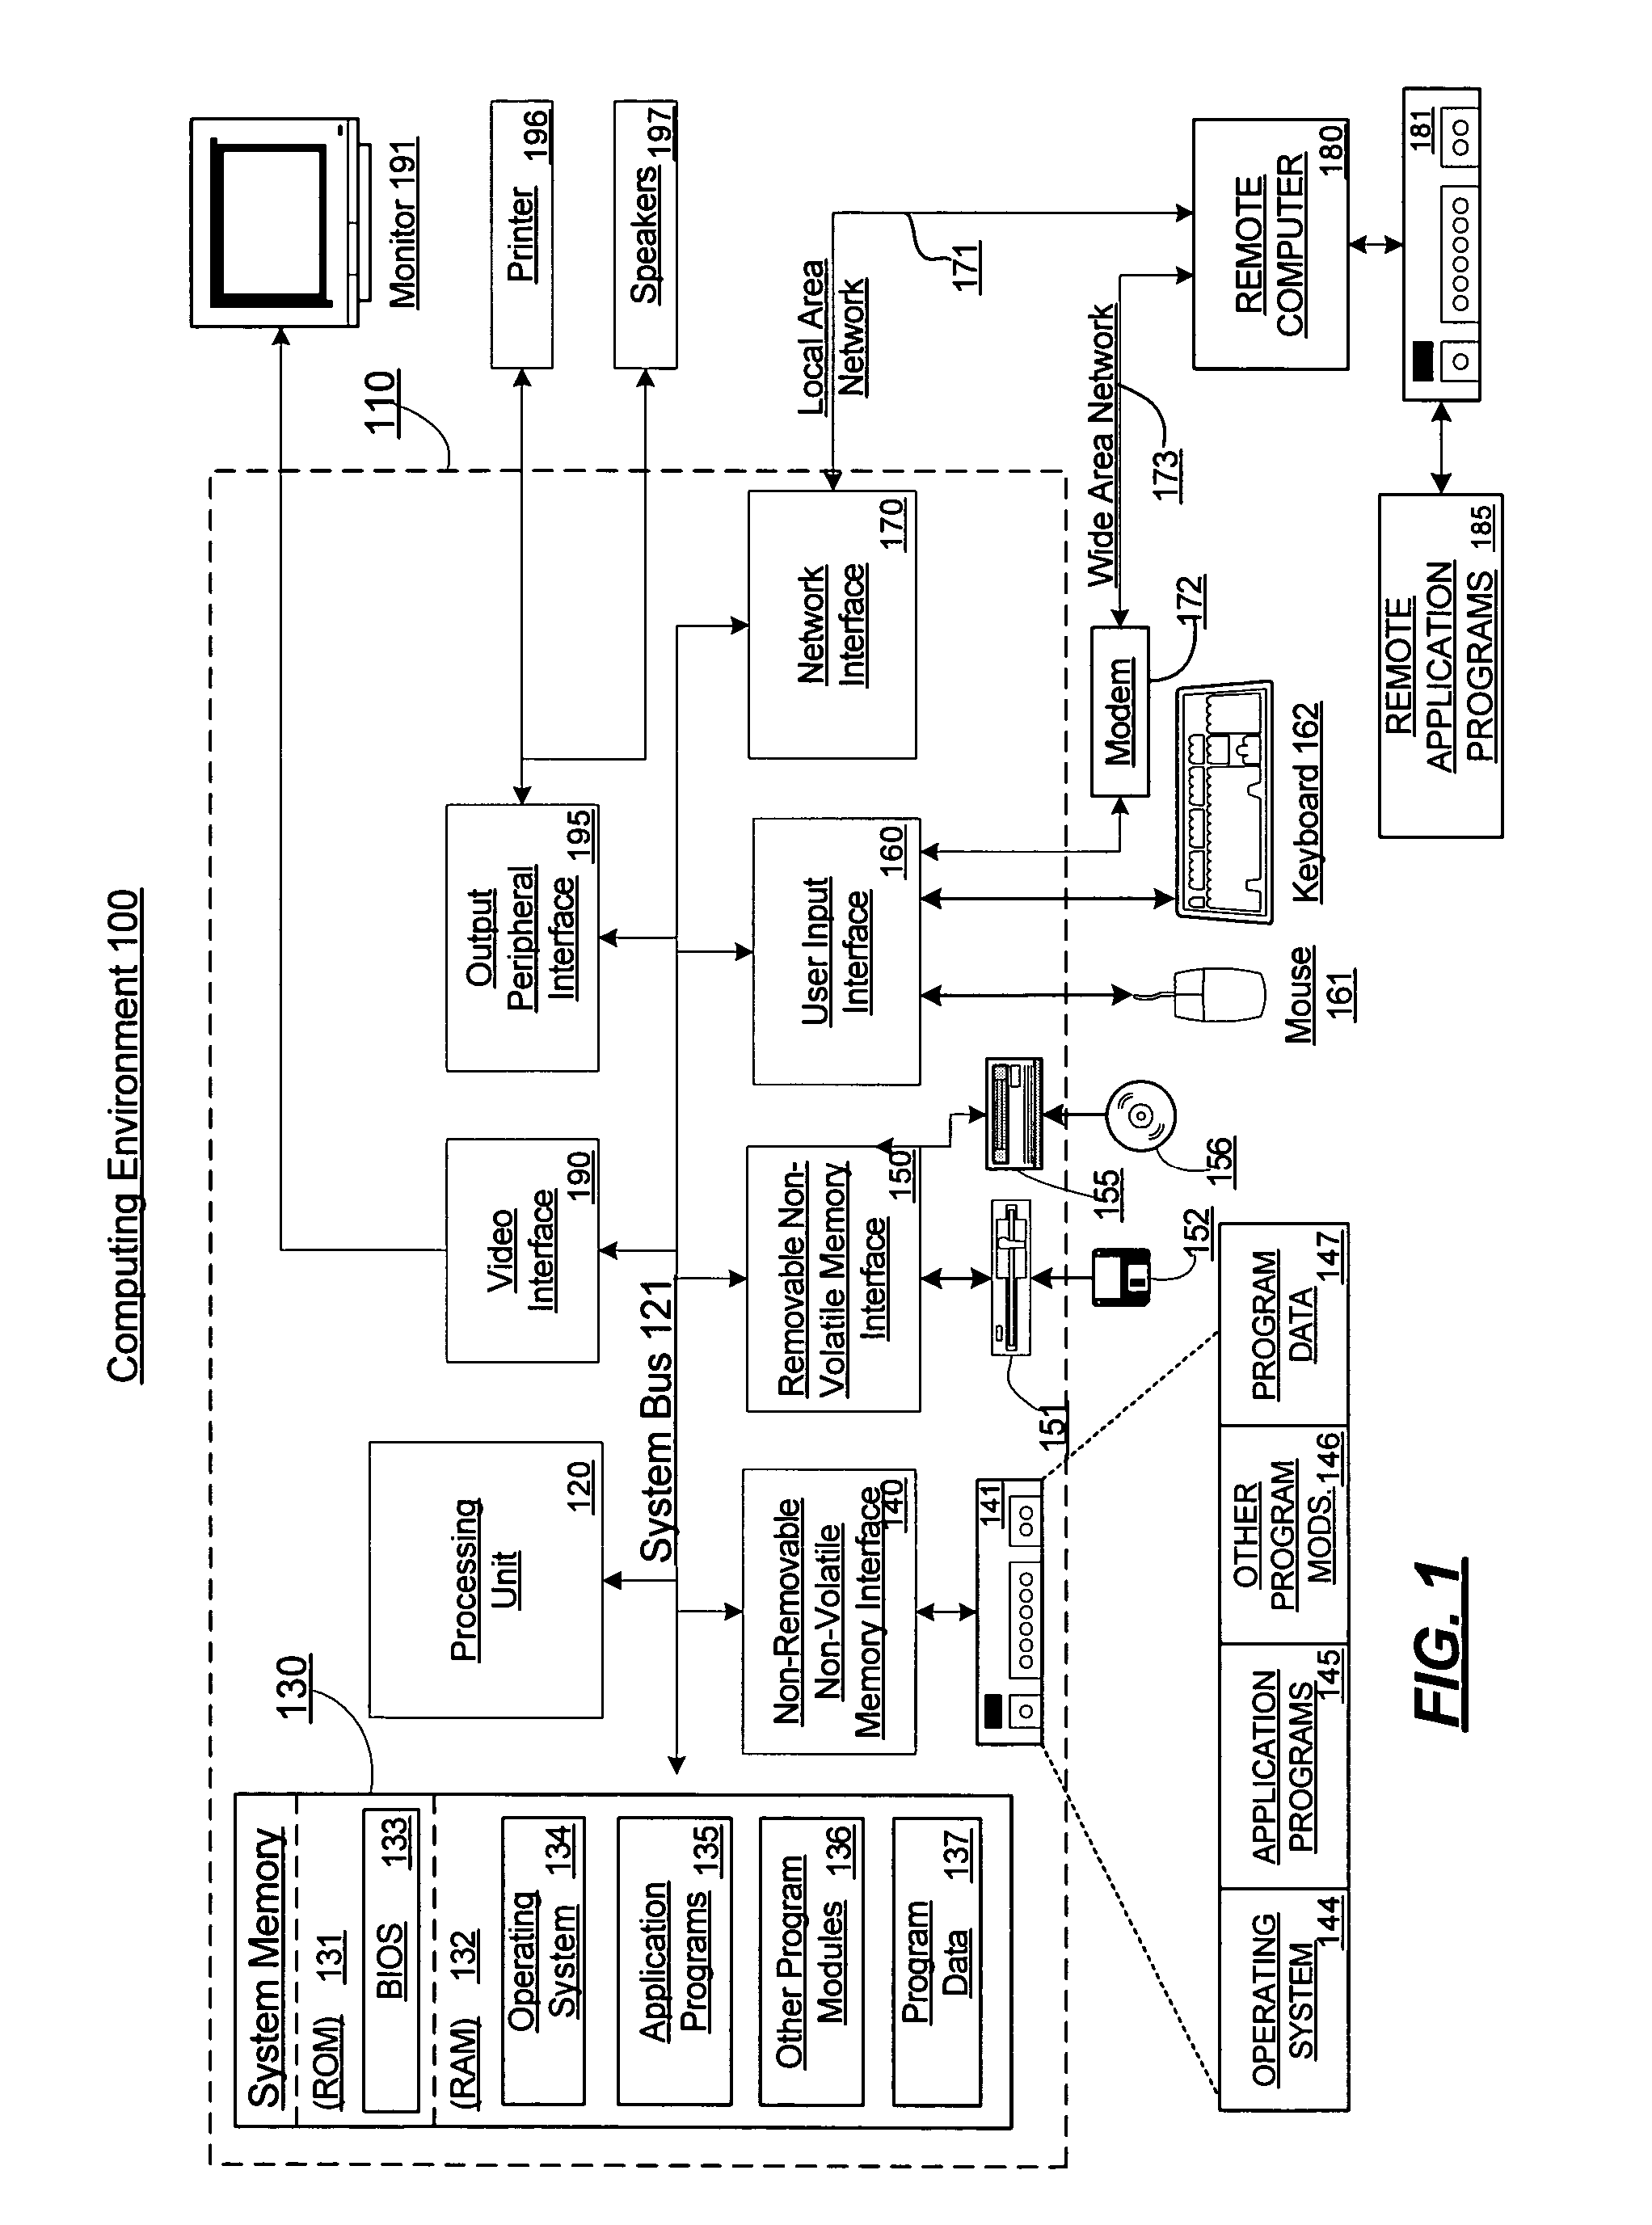 Providing secure input to a system with a high-assurance execution environment